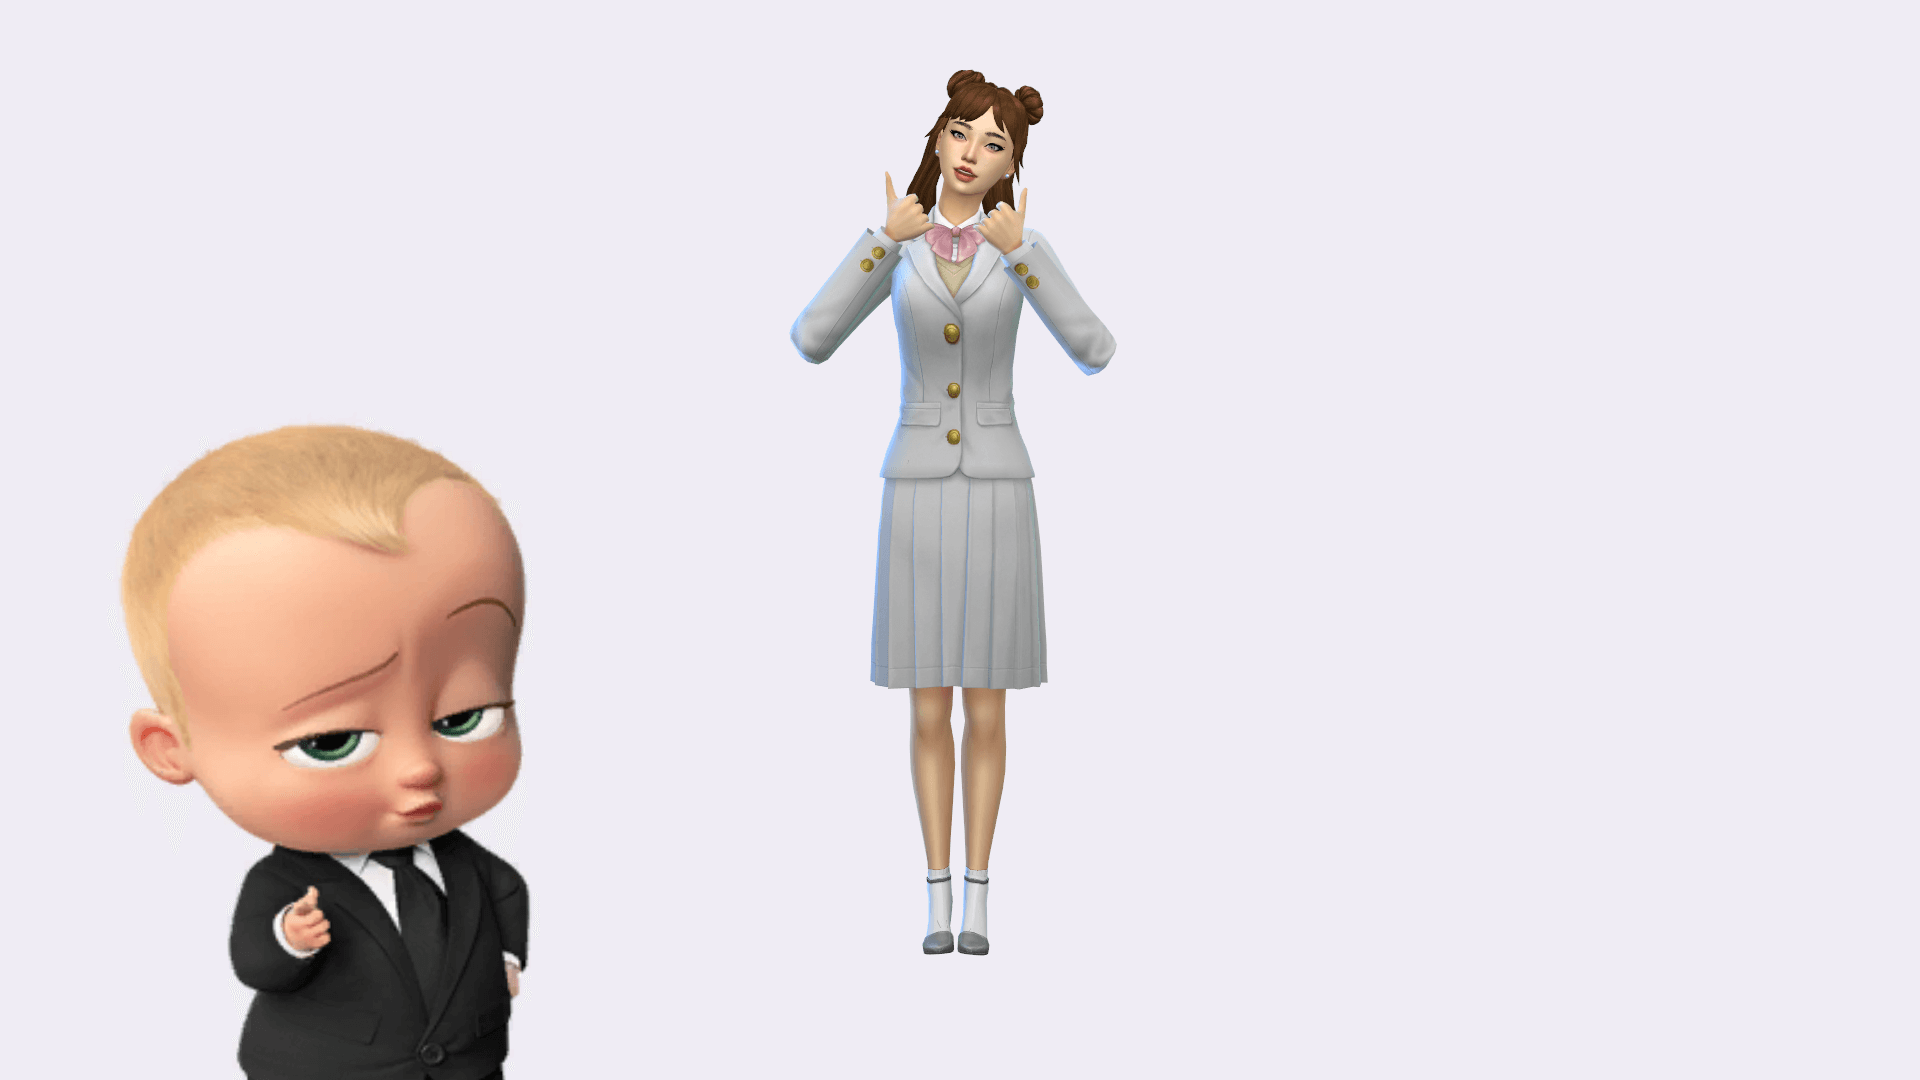 Sims 4 Cas Background The Boss Baby.